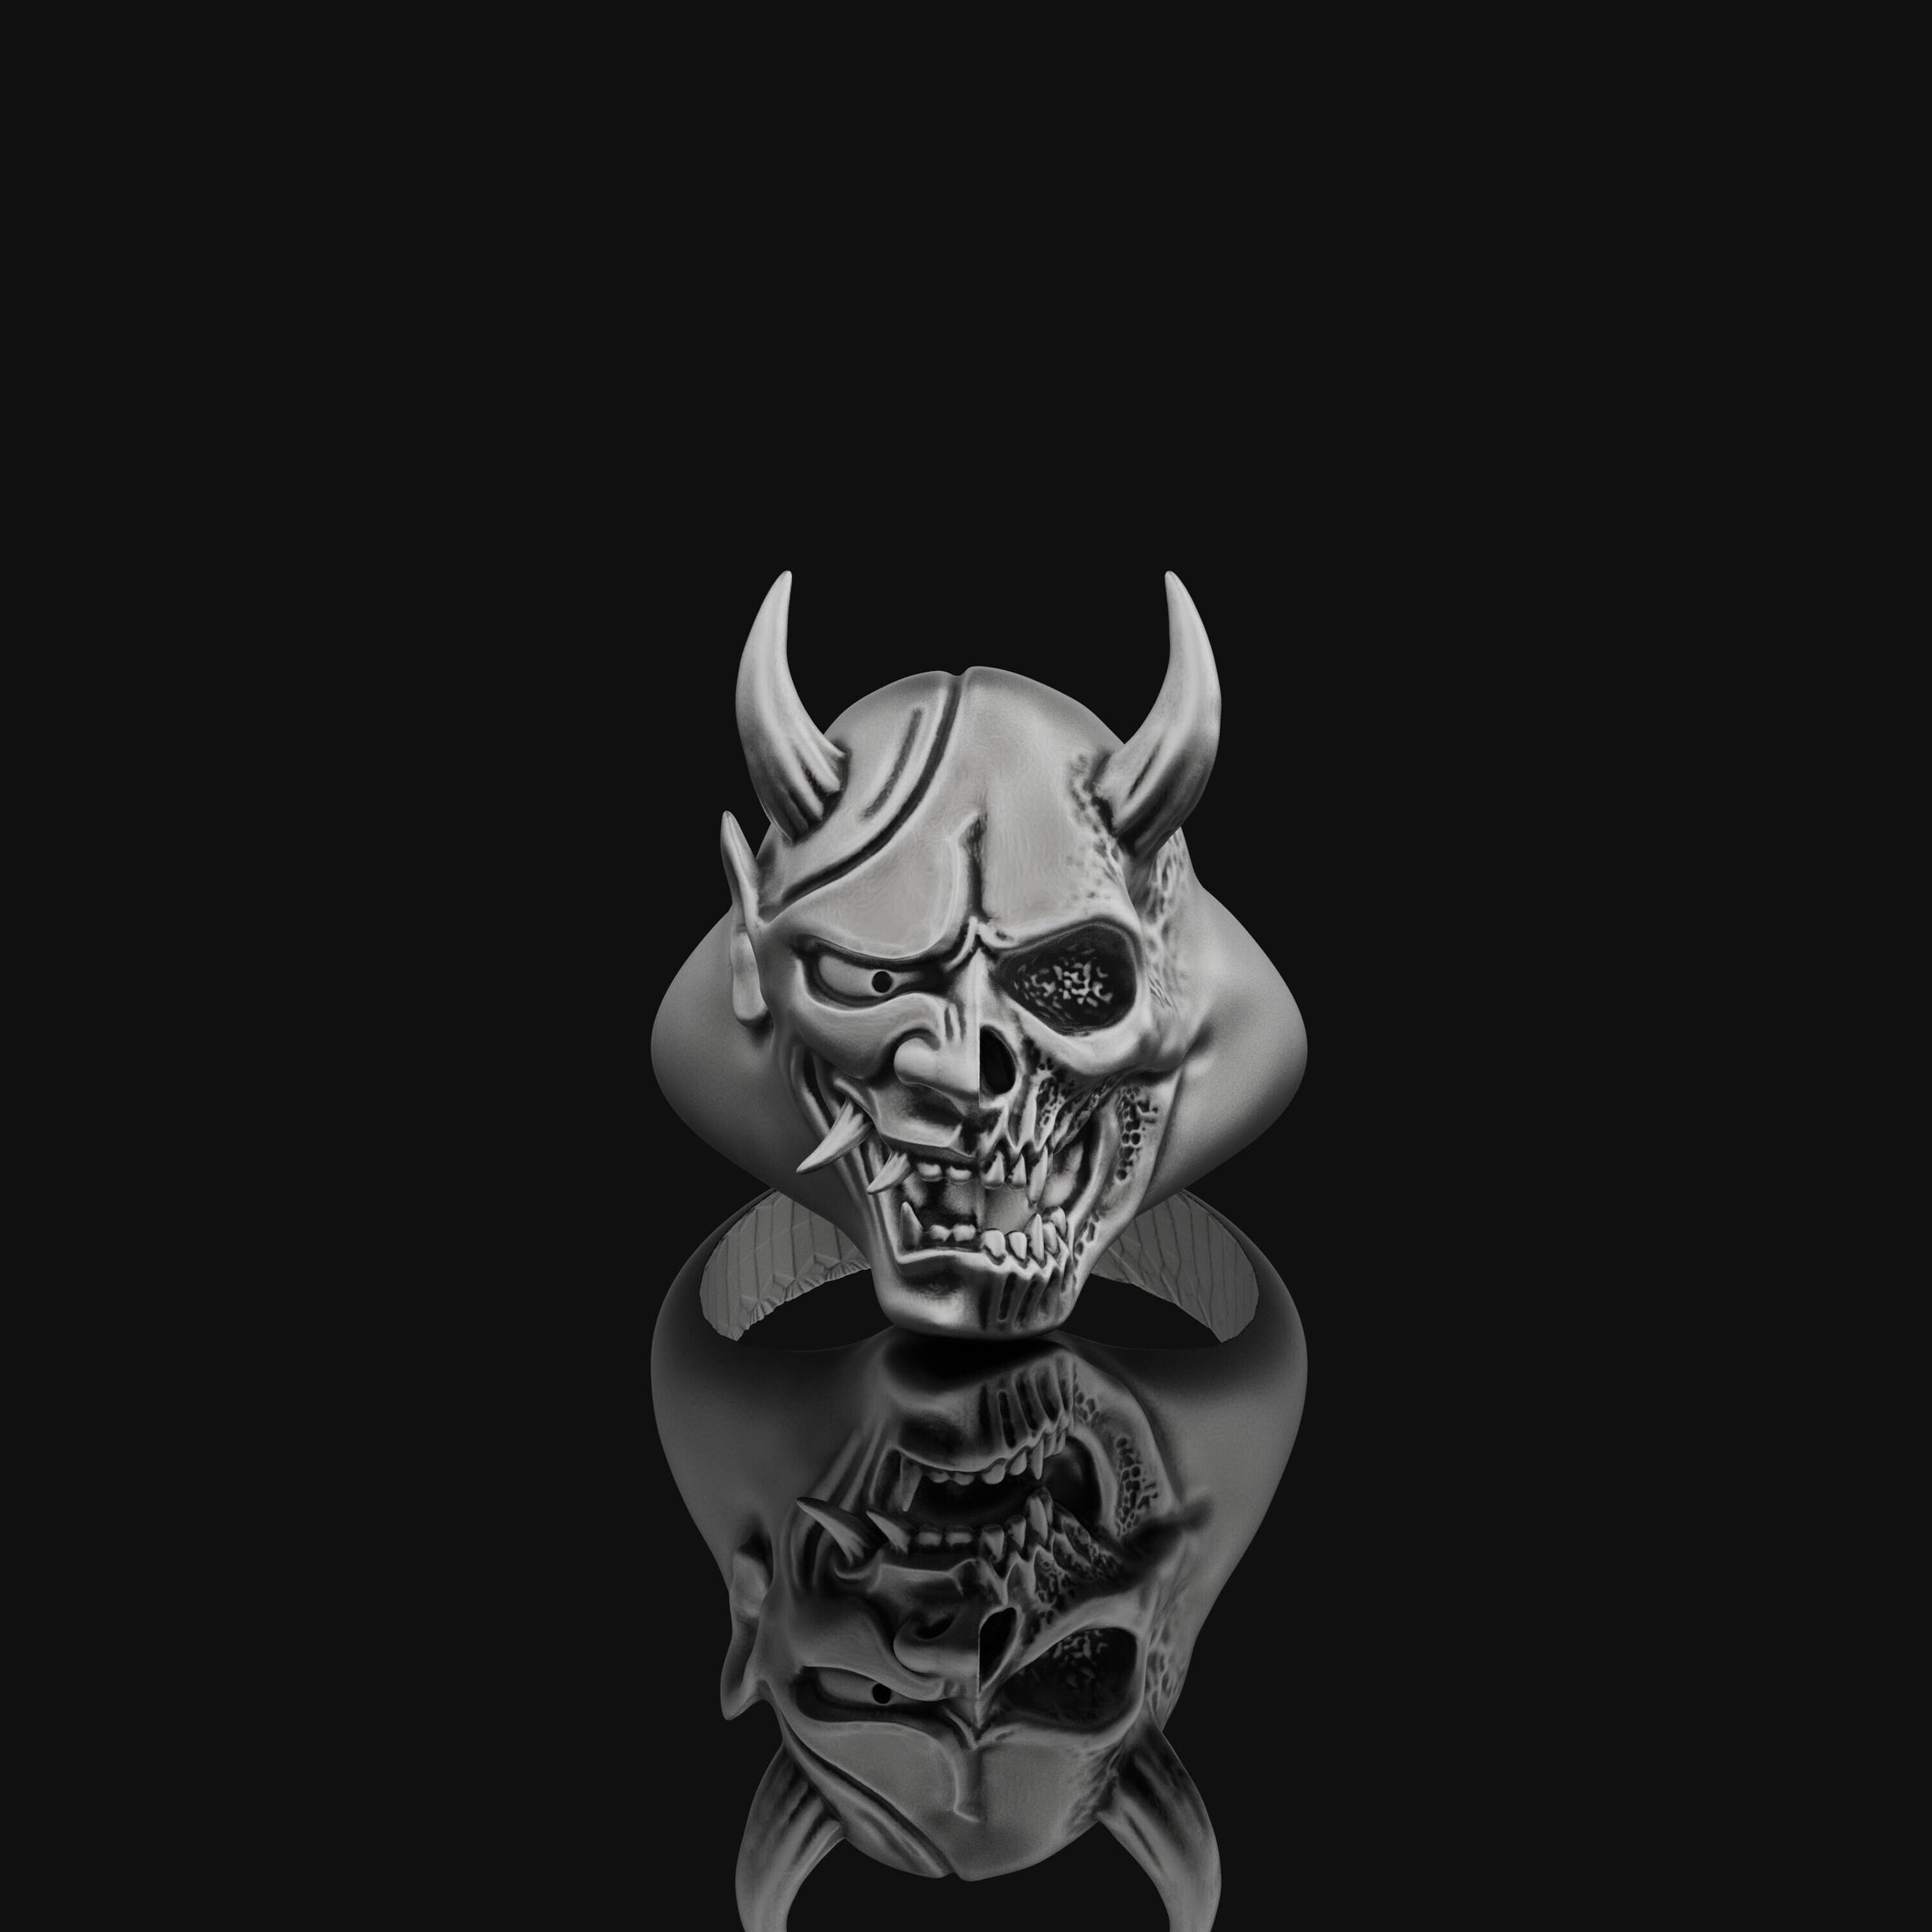 Silver Dead Oni Ring, Half-Breed Oni-Hannya Design, Japanese Skull Ring, Unique Yokai Inspired Jewelry, Cultural Mythology Piece Oxidized Finish